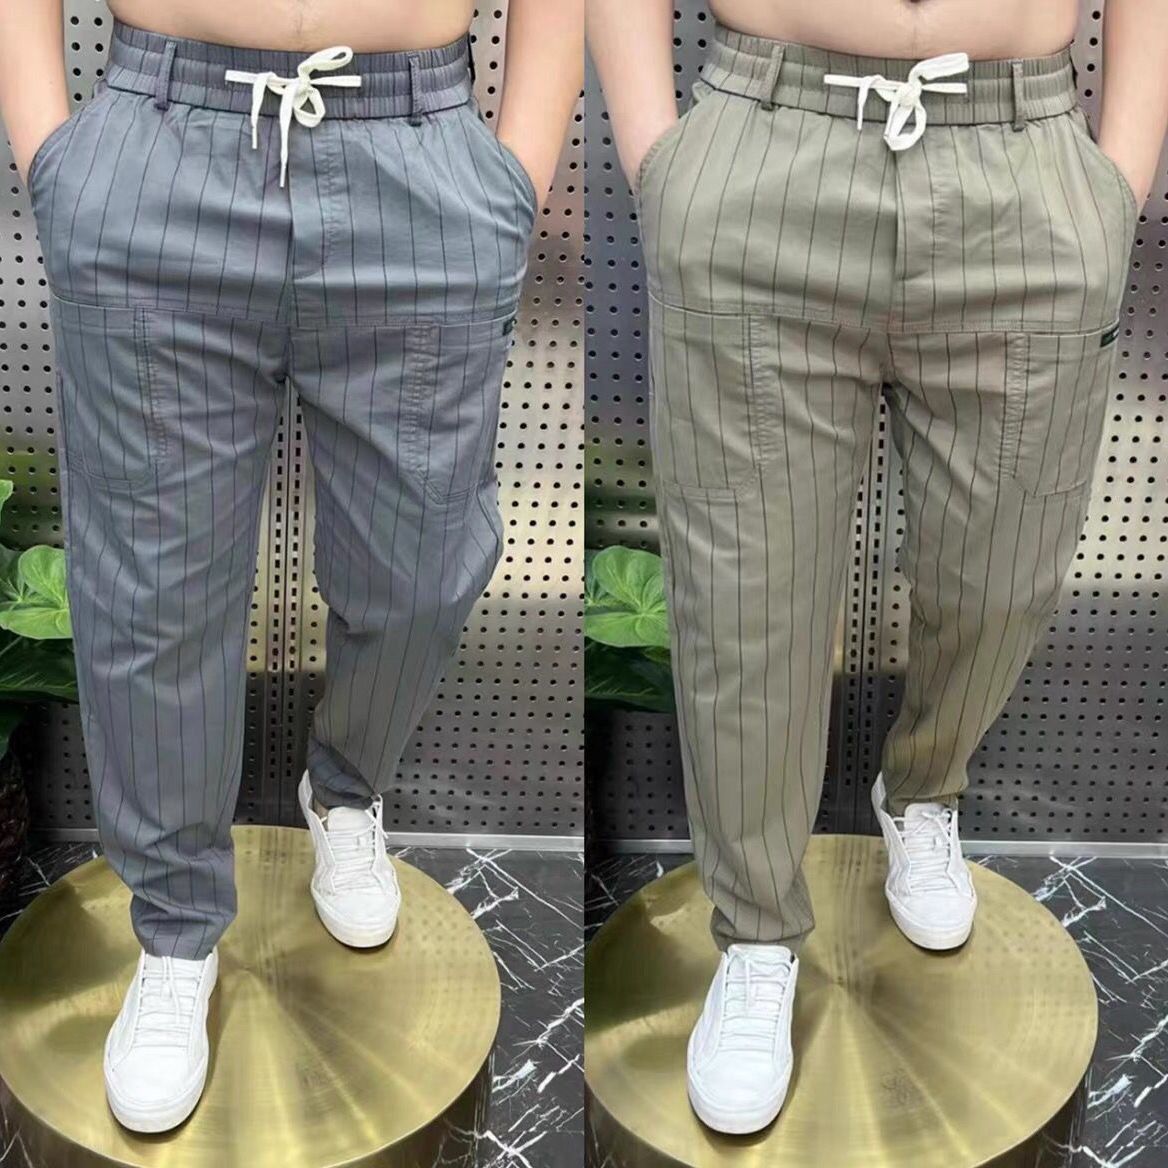 Men's casual pants spring and summer 2022 new loose trendy all-match thin vertical stripes six-pocket straight pants